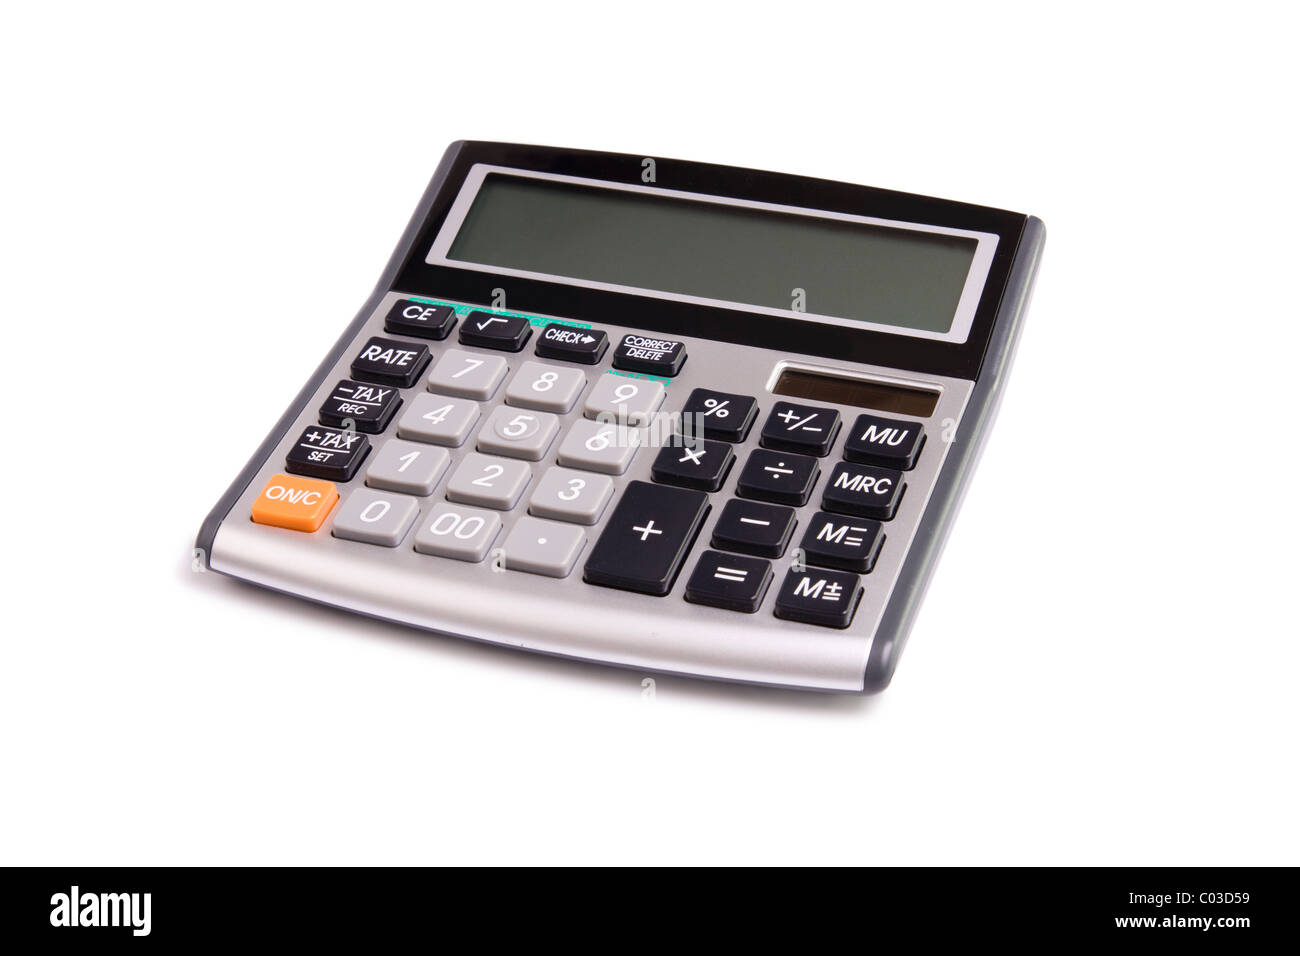 A small calculator, isolated on a white background. Stock Photo